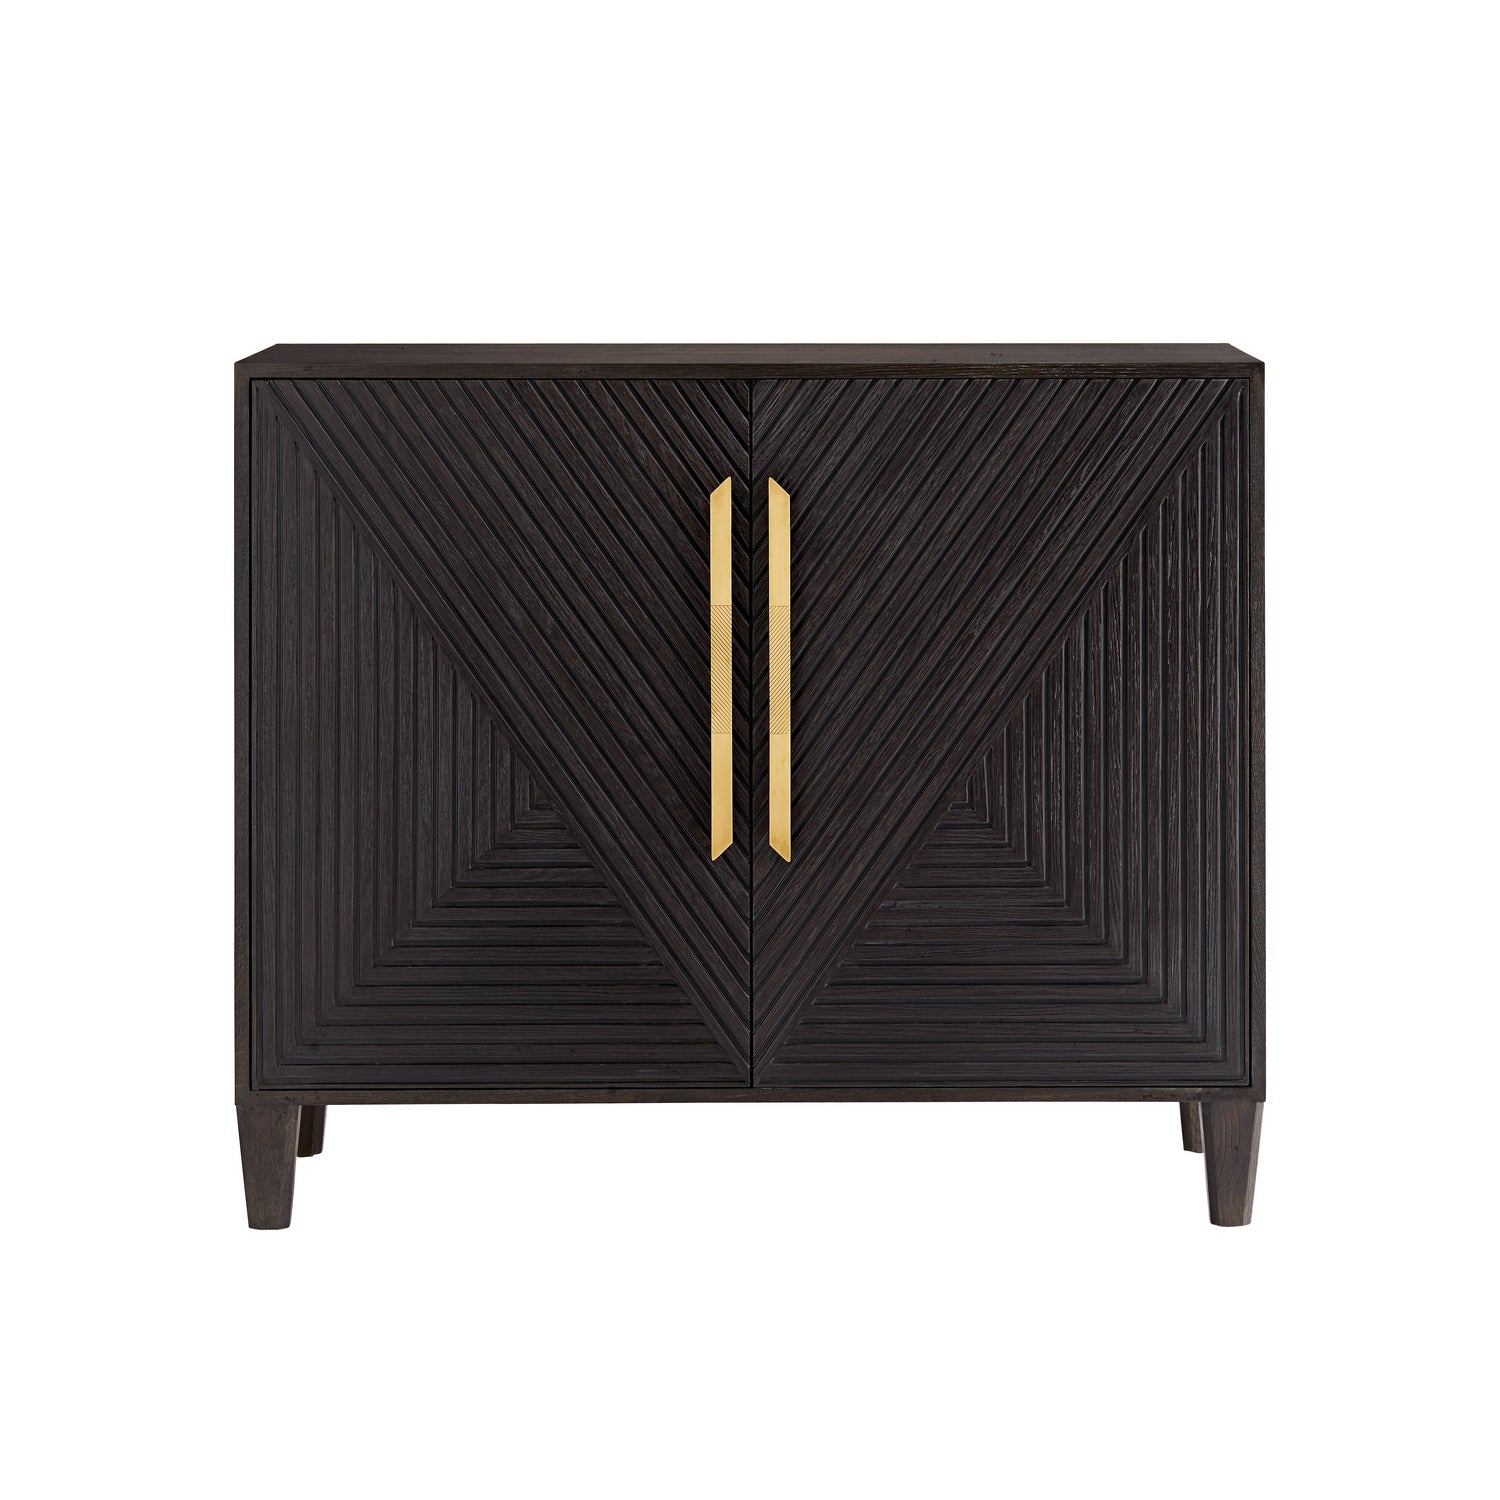 Cabinet from the Hendrix collection in Ebony finish